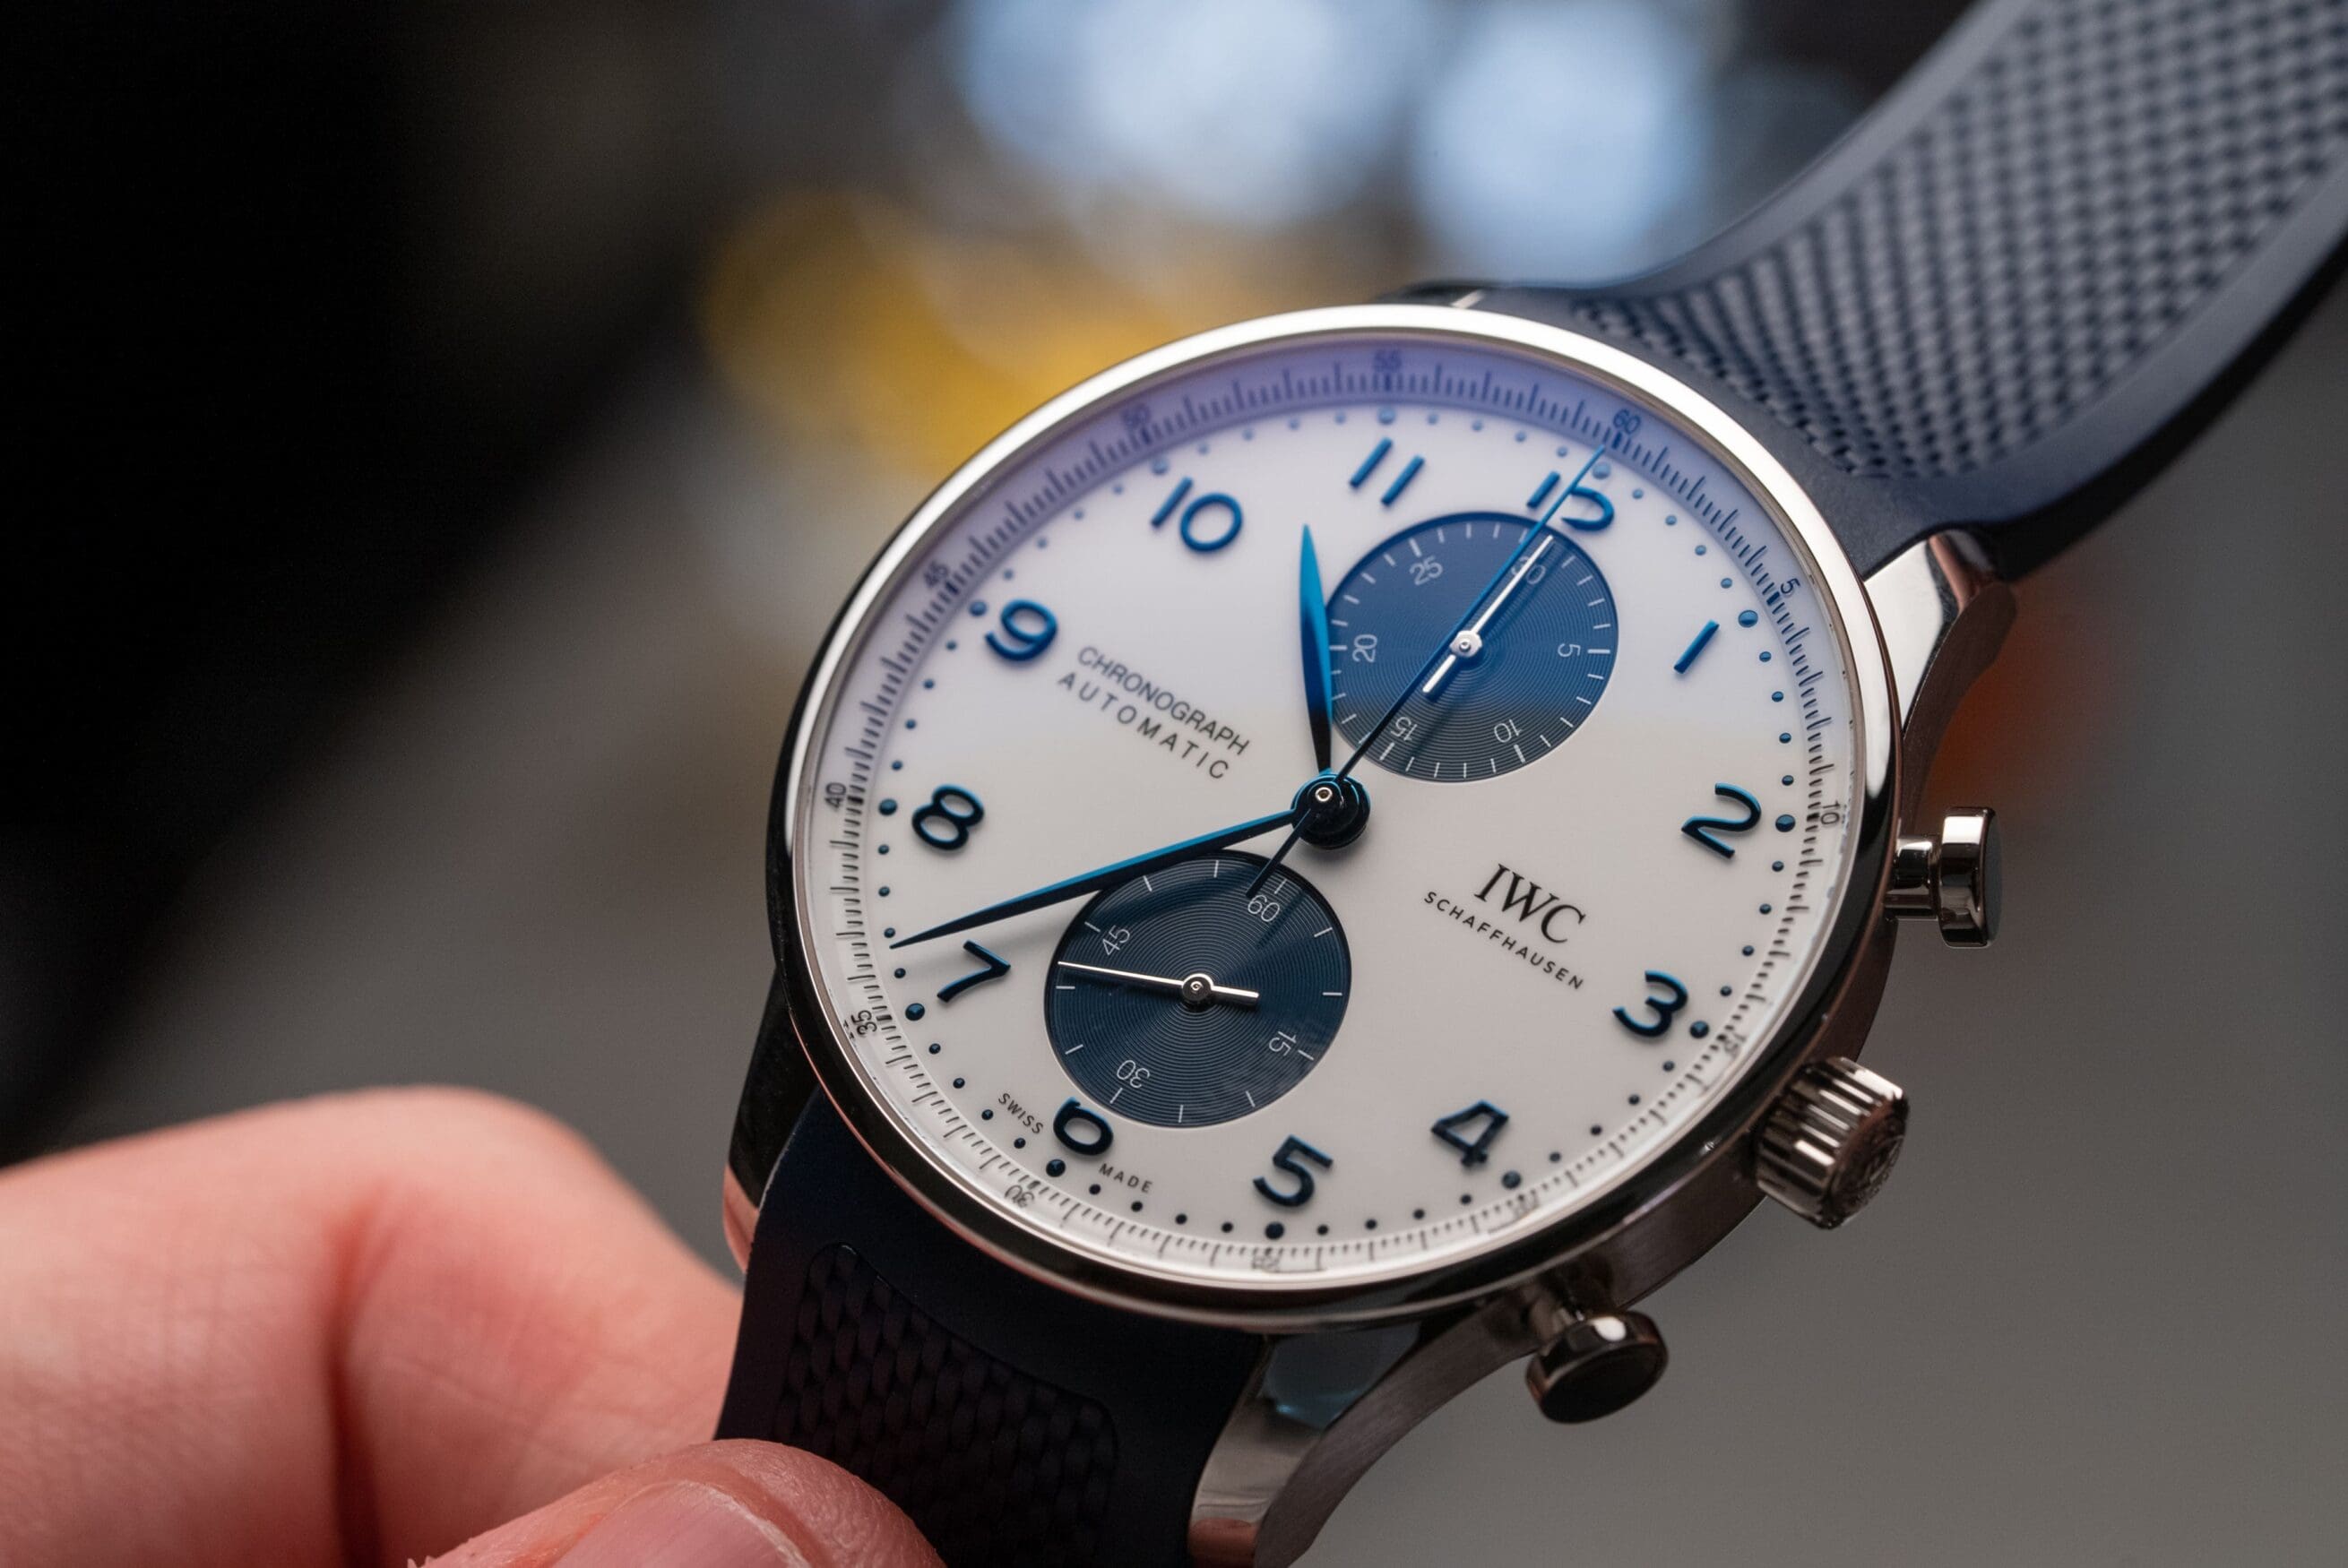 HANDS-ON: The new IWC Portugeiser Chronograph IW371620 is a near-perfect warm weather watch